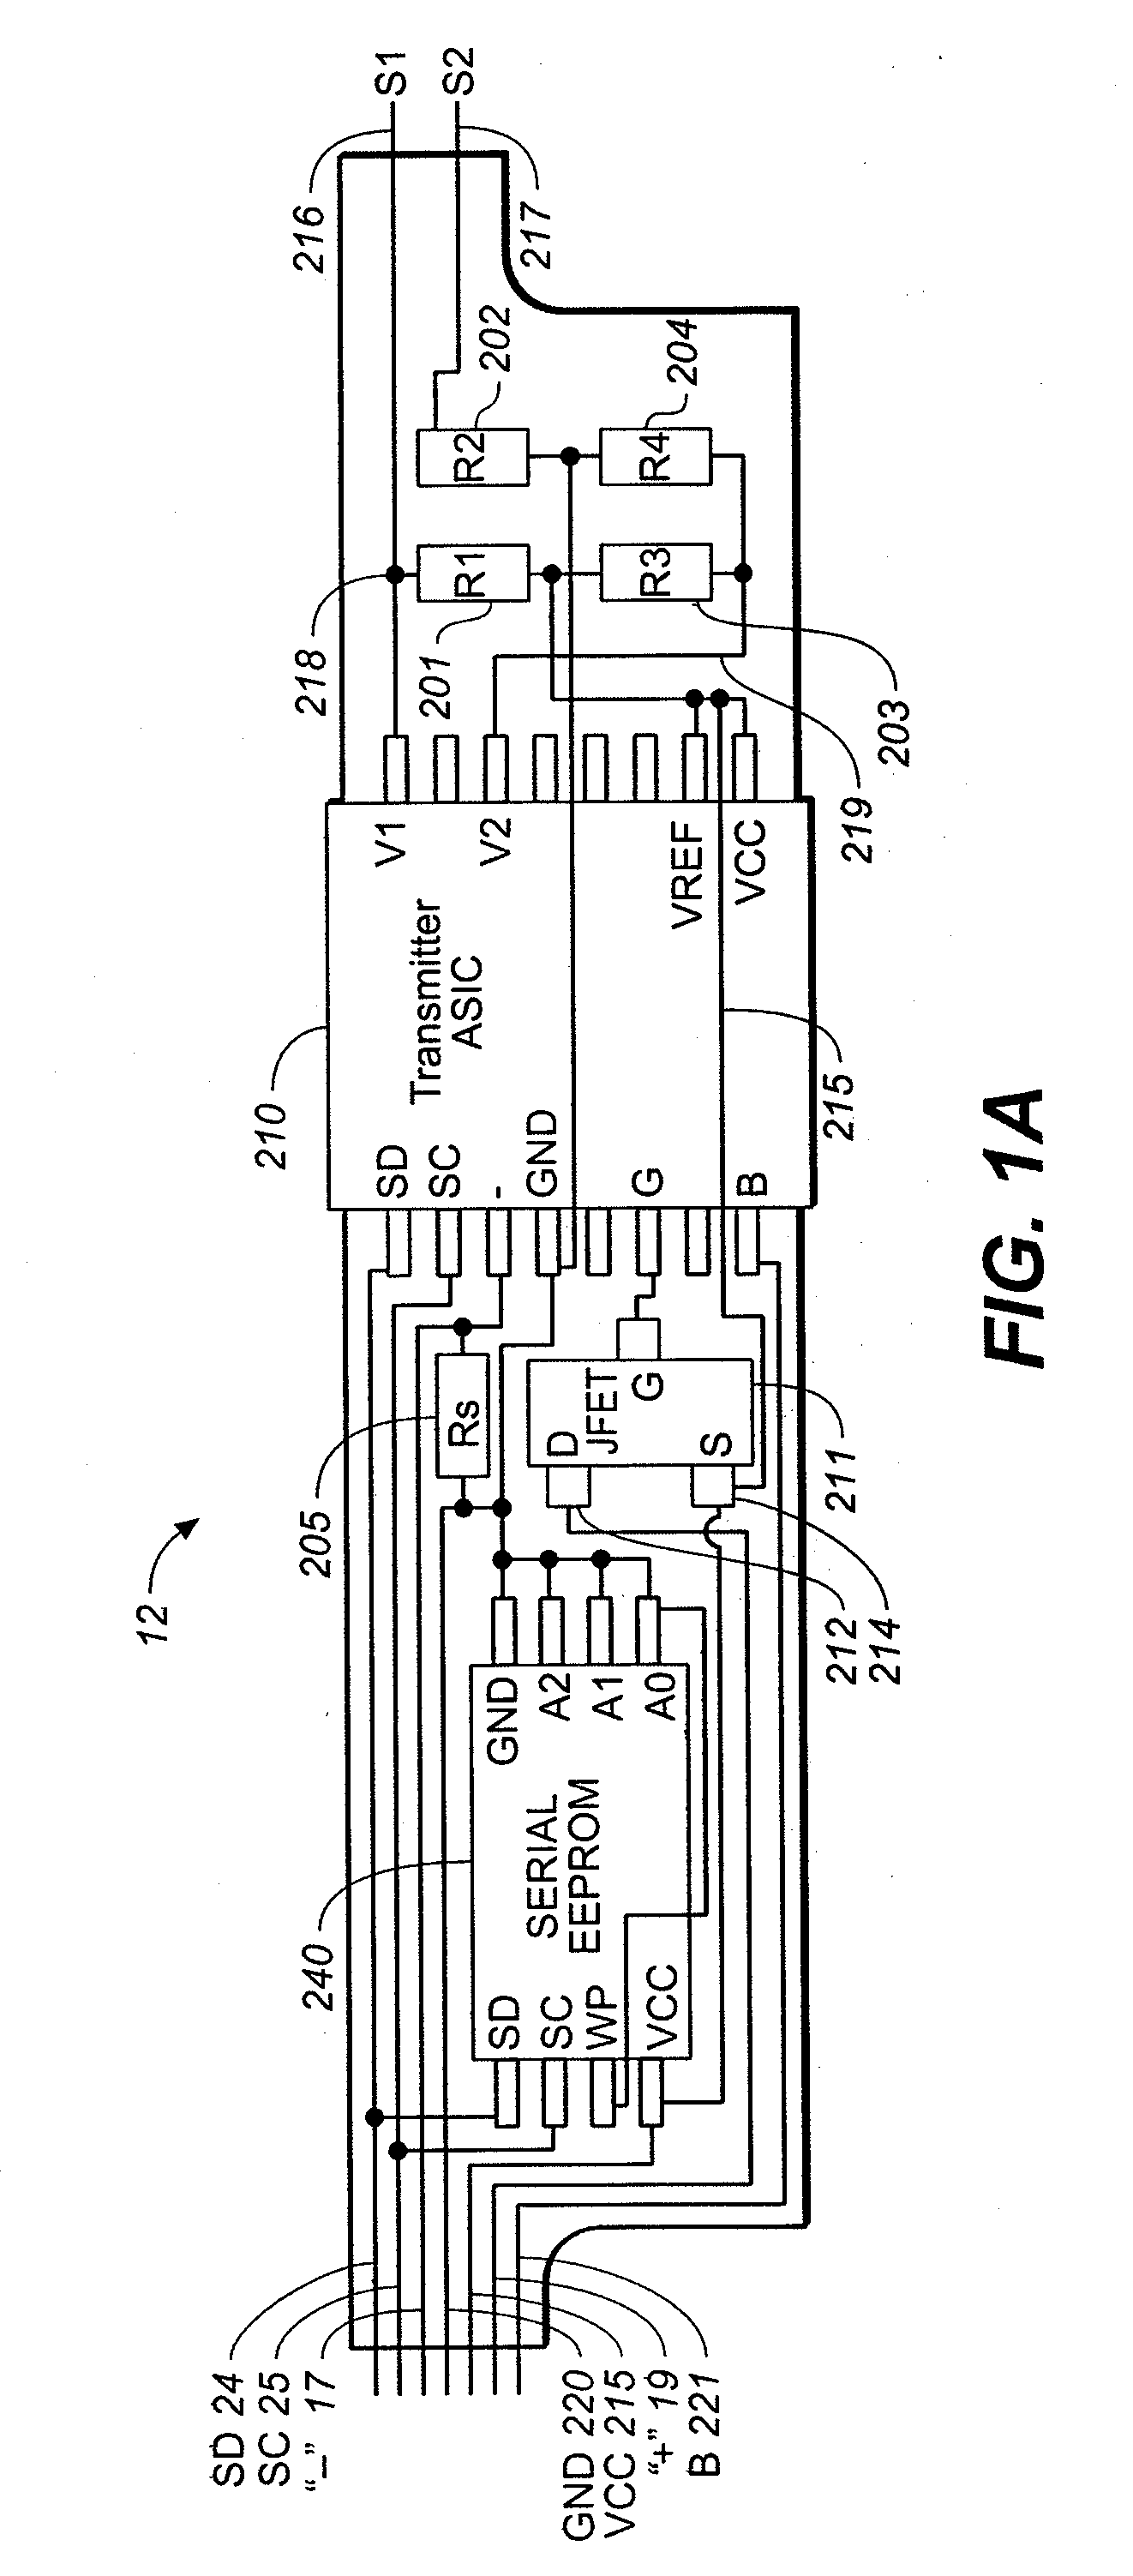 Temperature-sensing and transmitting assemblies, programmable temperature sensor units, and methods of making and using them